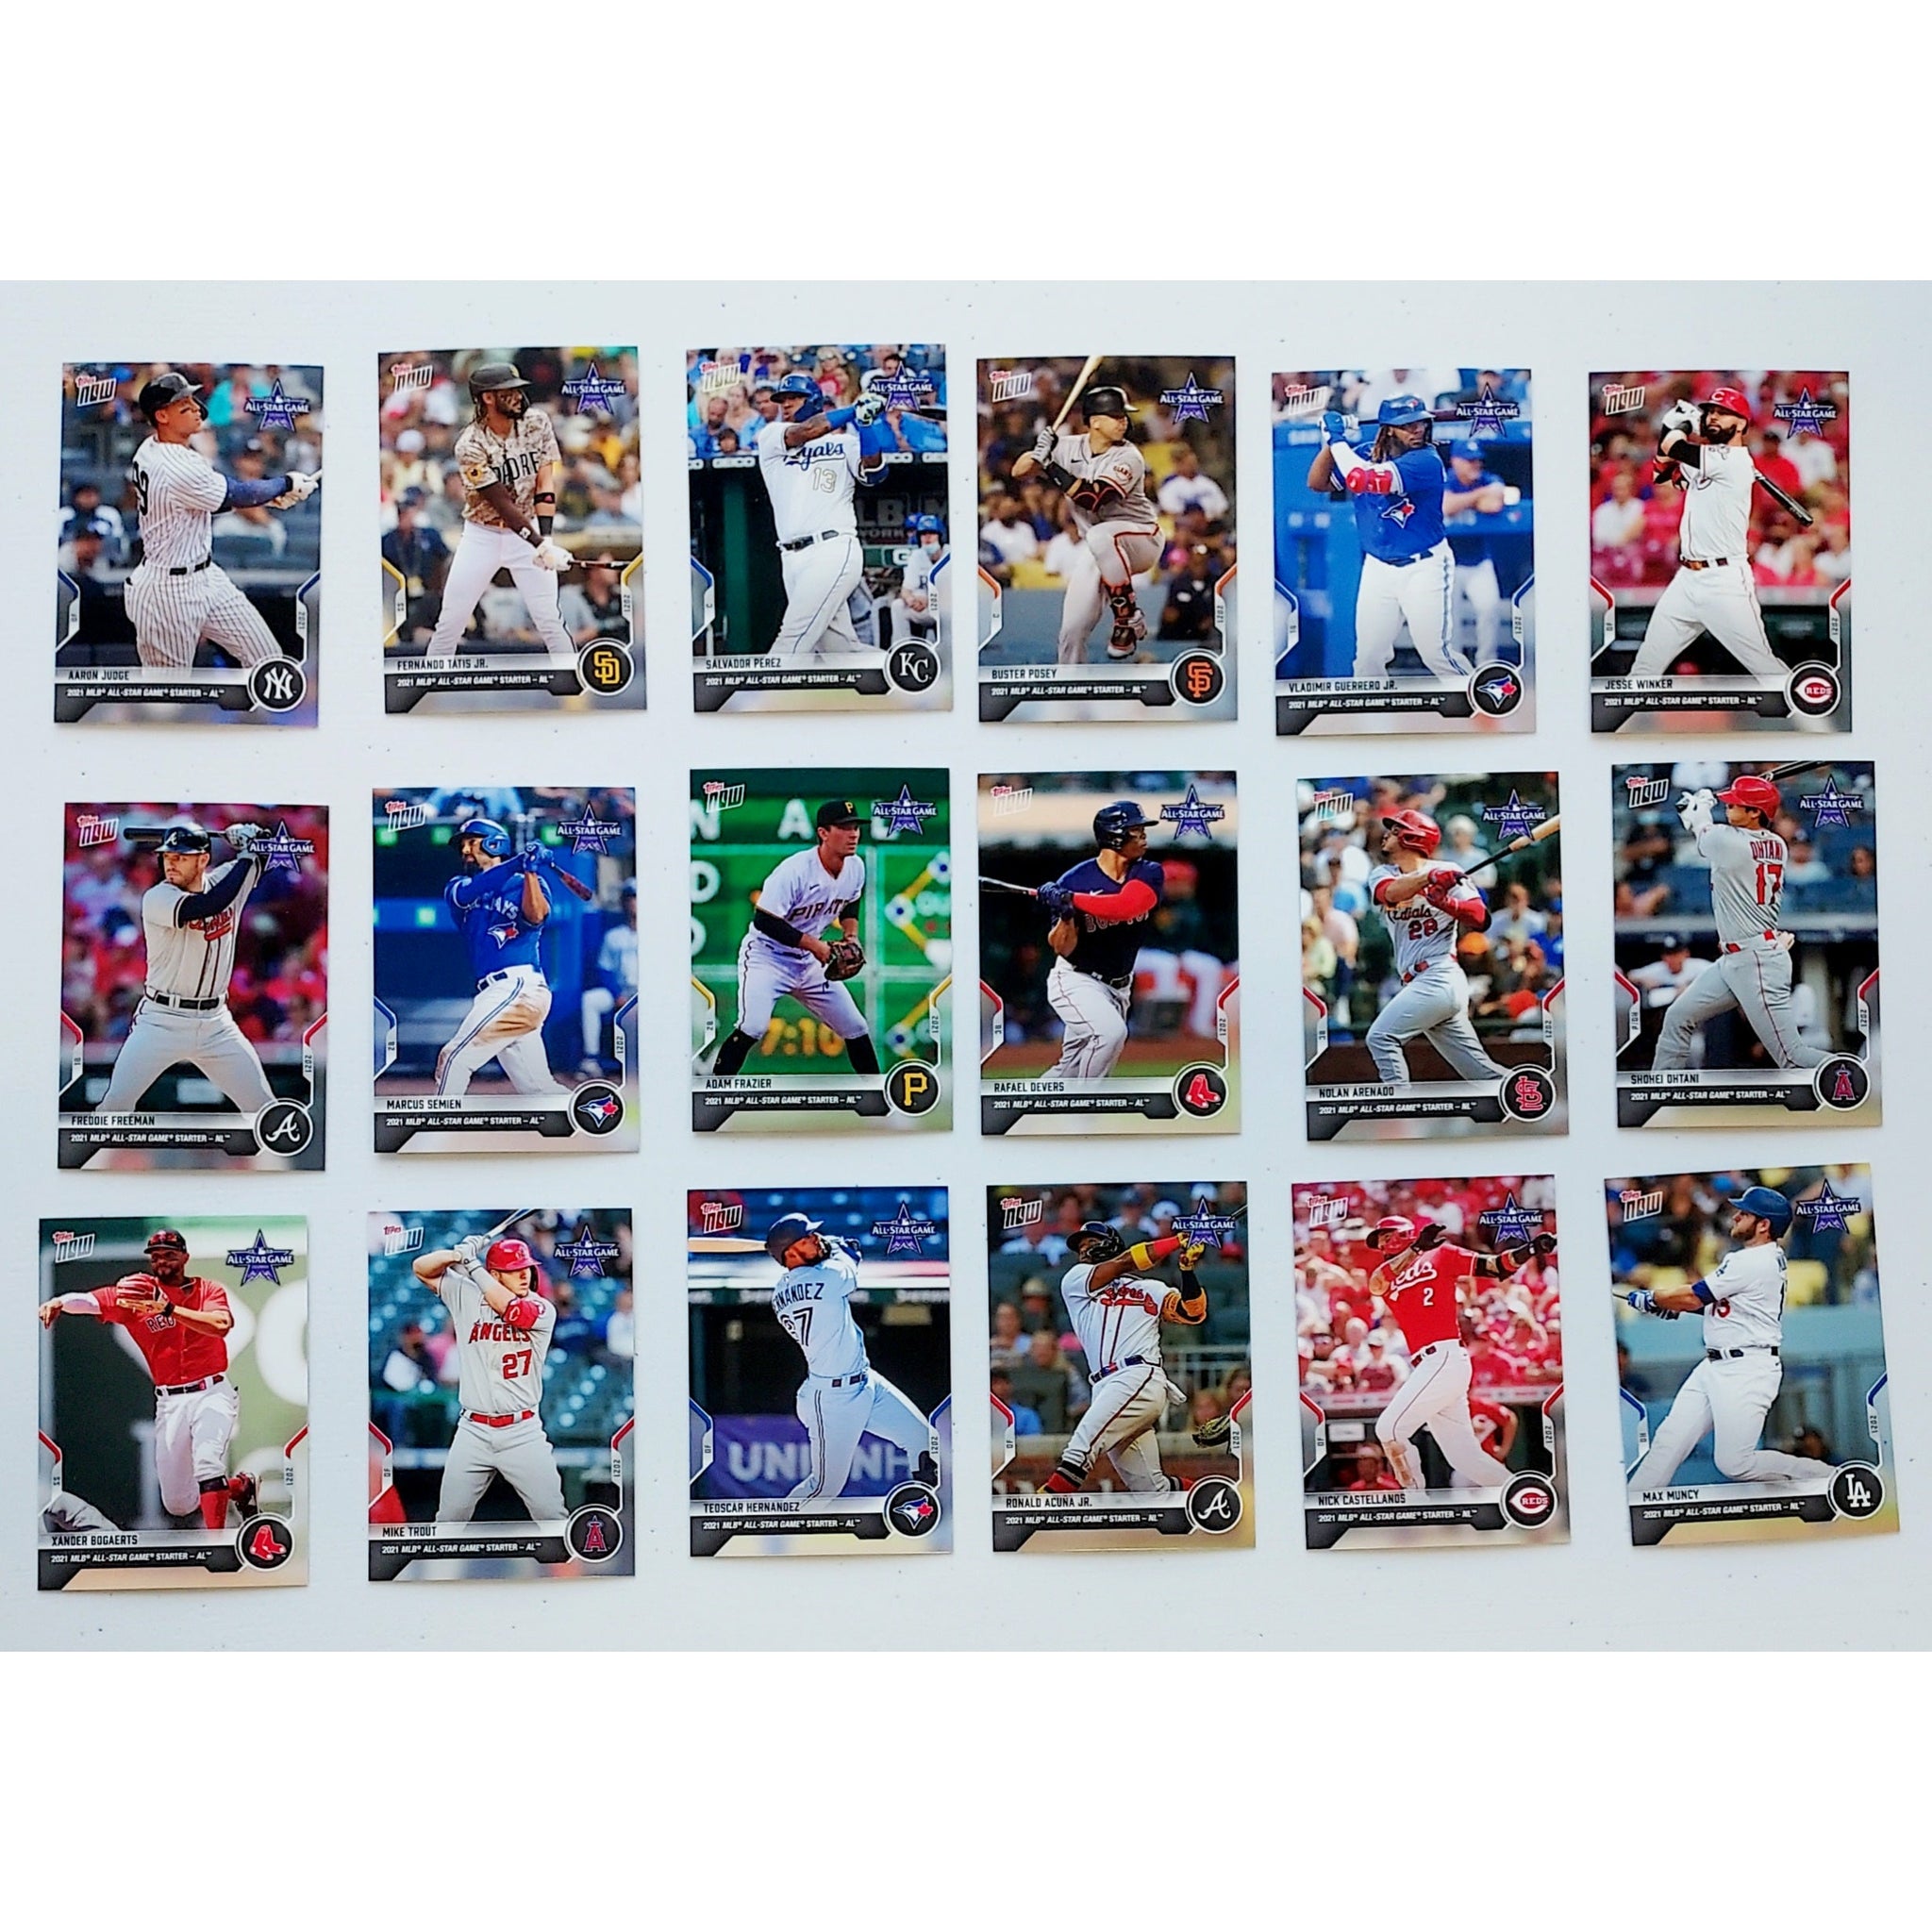 2021 MLB All-Star Game Coors Field- 18 Card Bundle (Pictured) - MLB TOPPS NOW